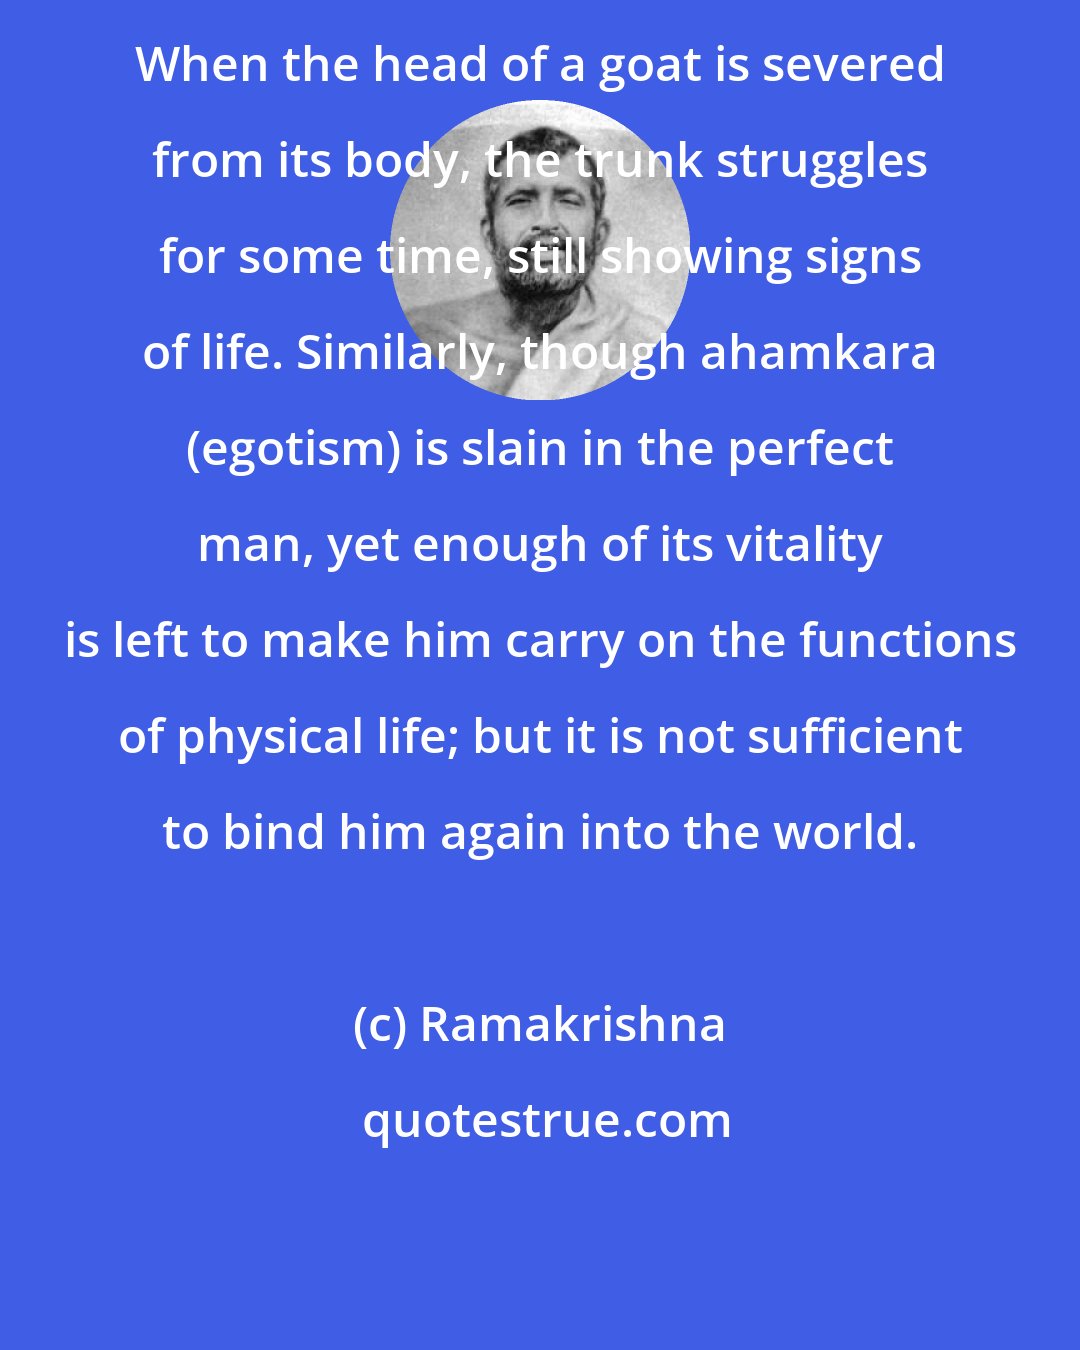 Ramakrishna: When the head of a goat is severed from its body, the trunk struggles for some time, still showing signs of life. Similarly, though ahamkara (egotism) is slain in the perfect man, yet enough of its vitality is left to make him carry on the functions of physical life; but it is not sufficient to bind him again into the world.